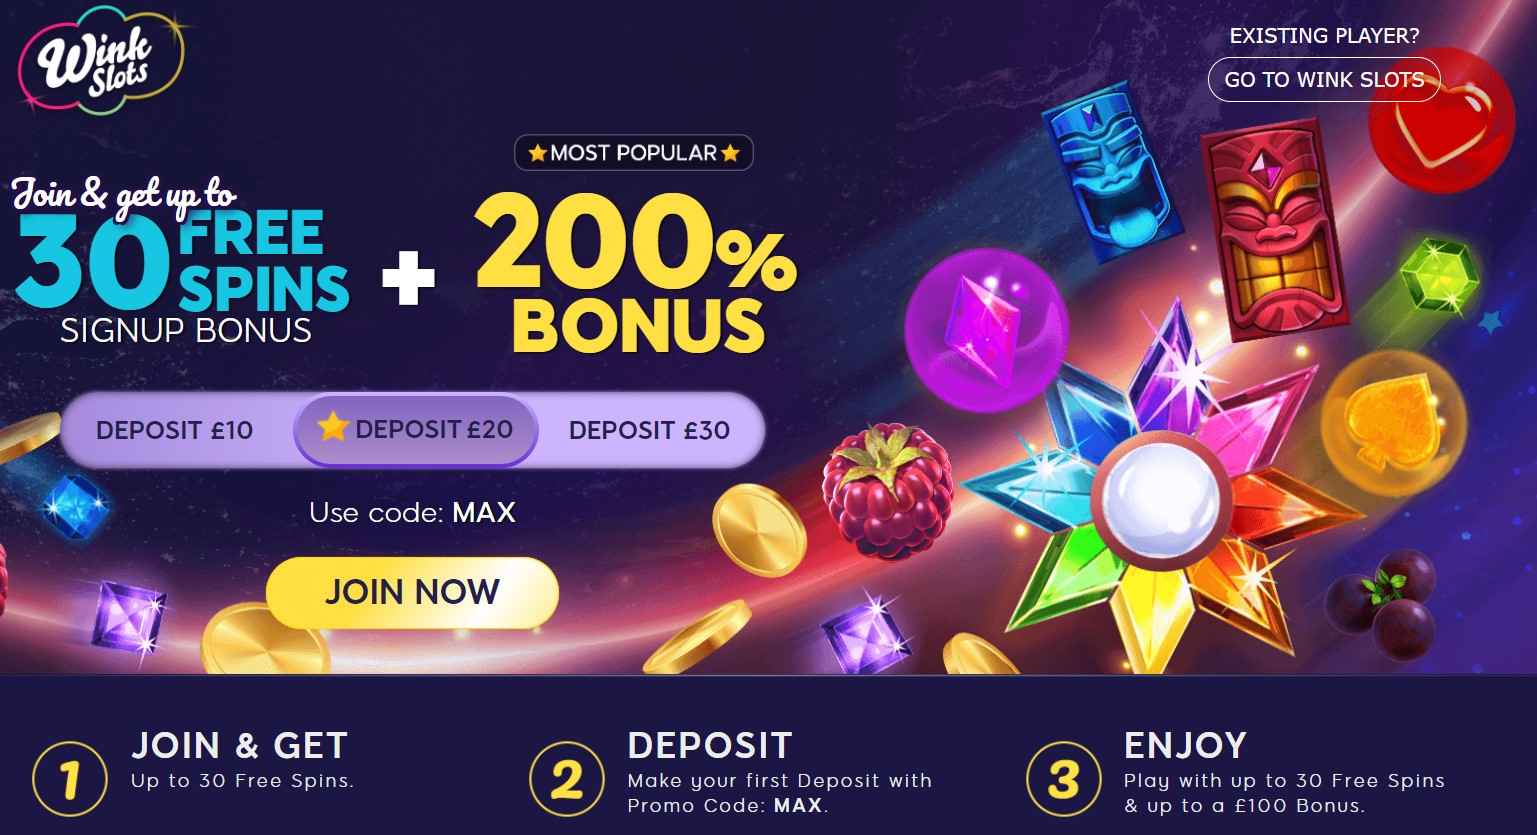 Wink Slots Welcome Offer